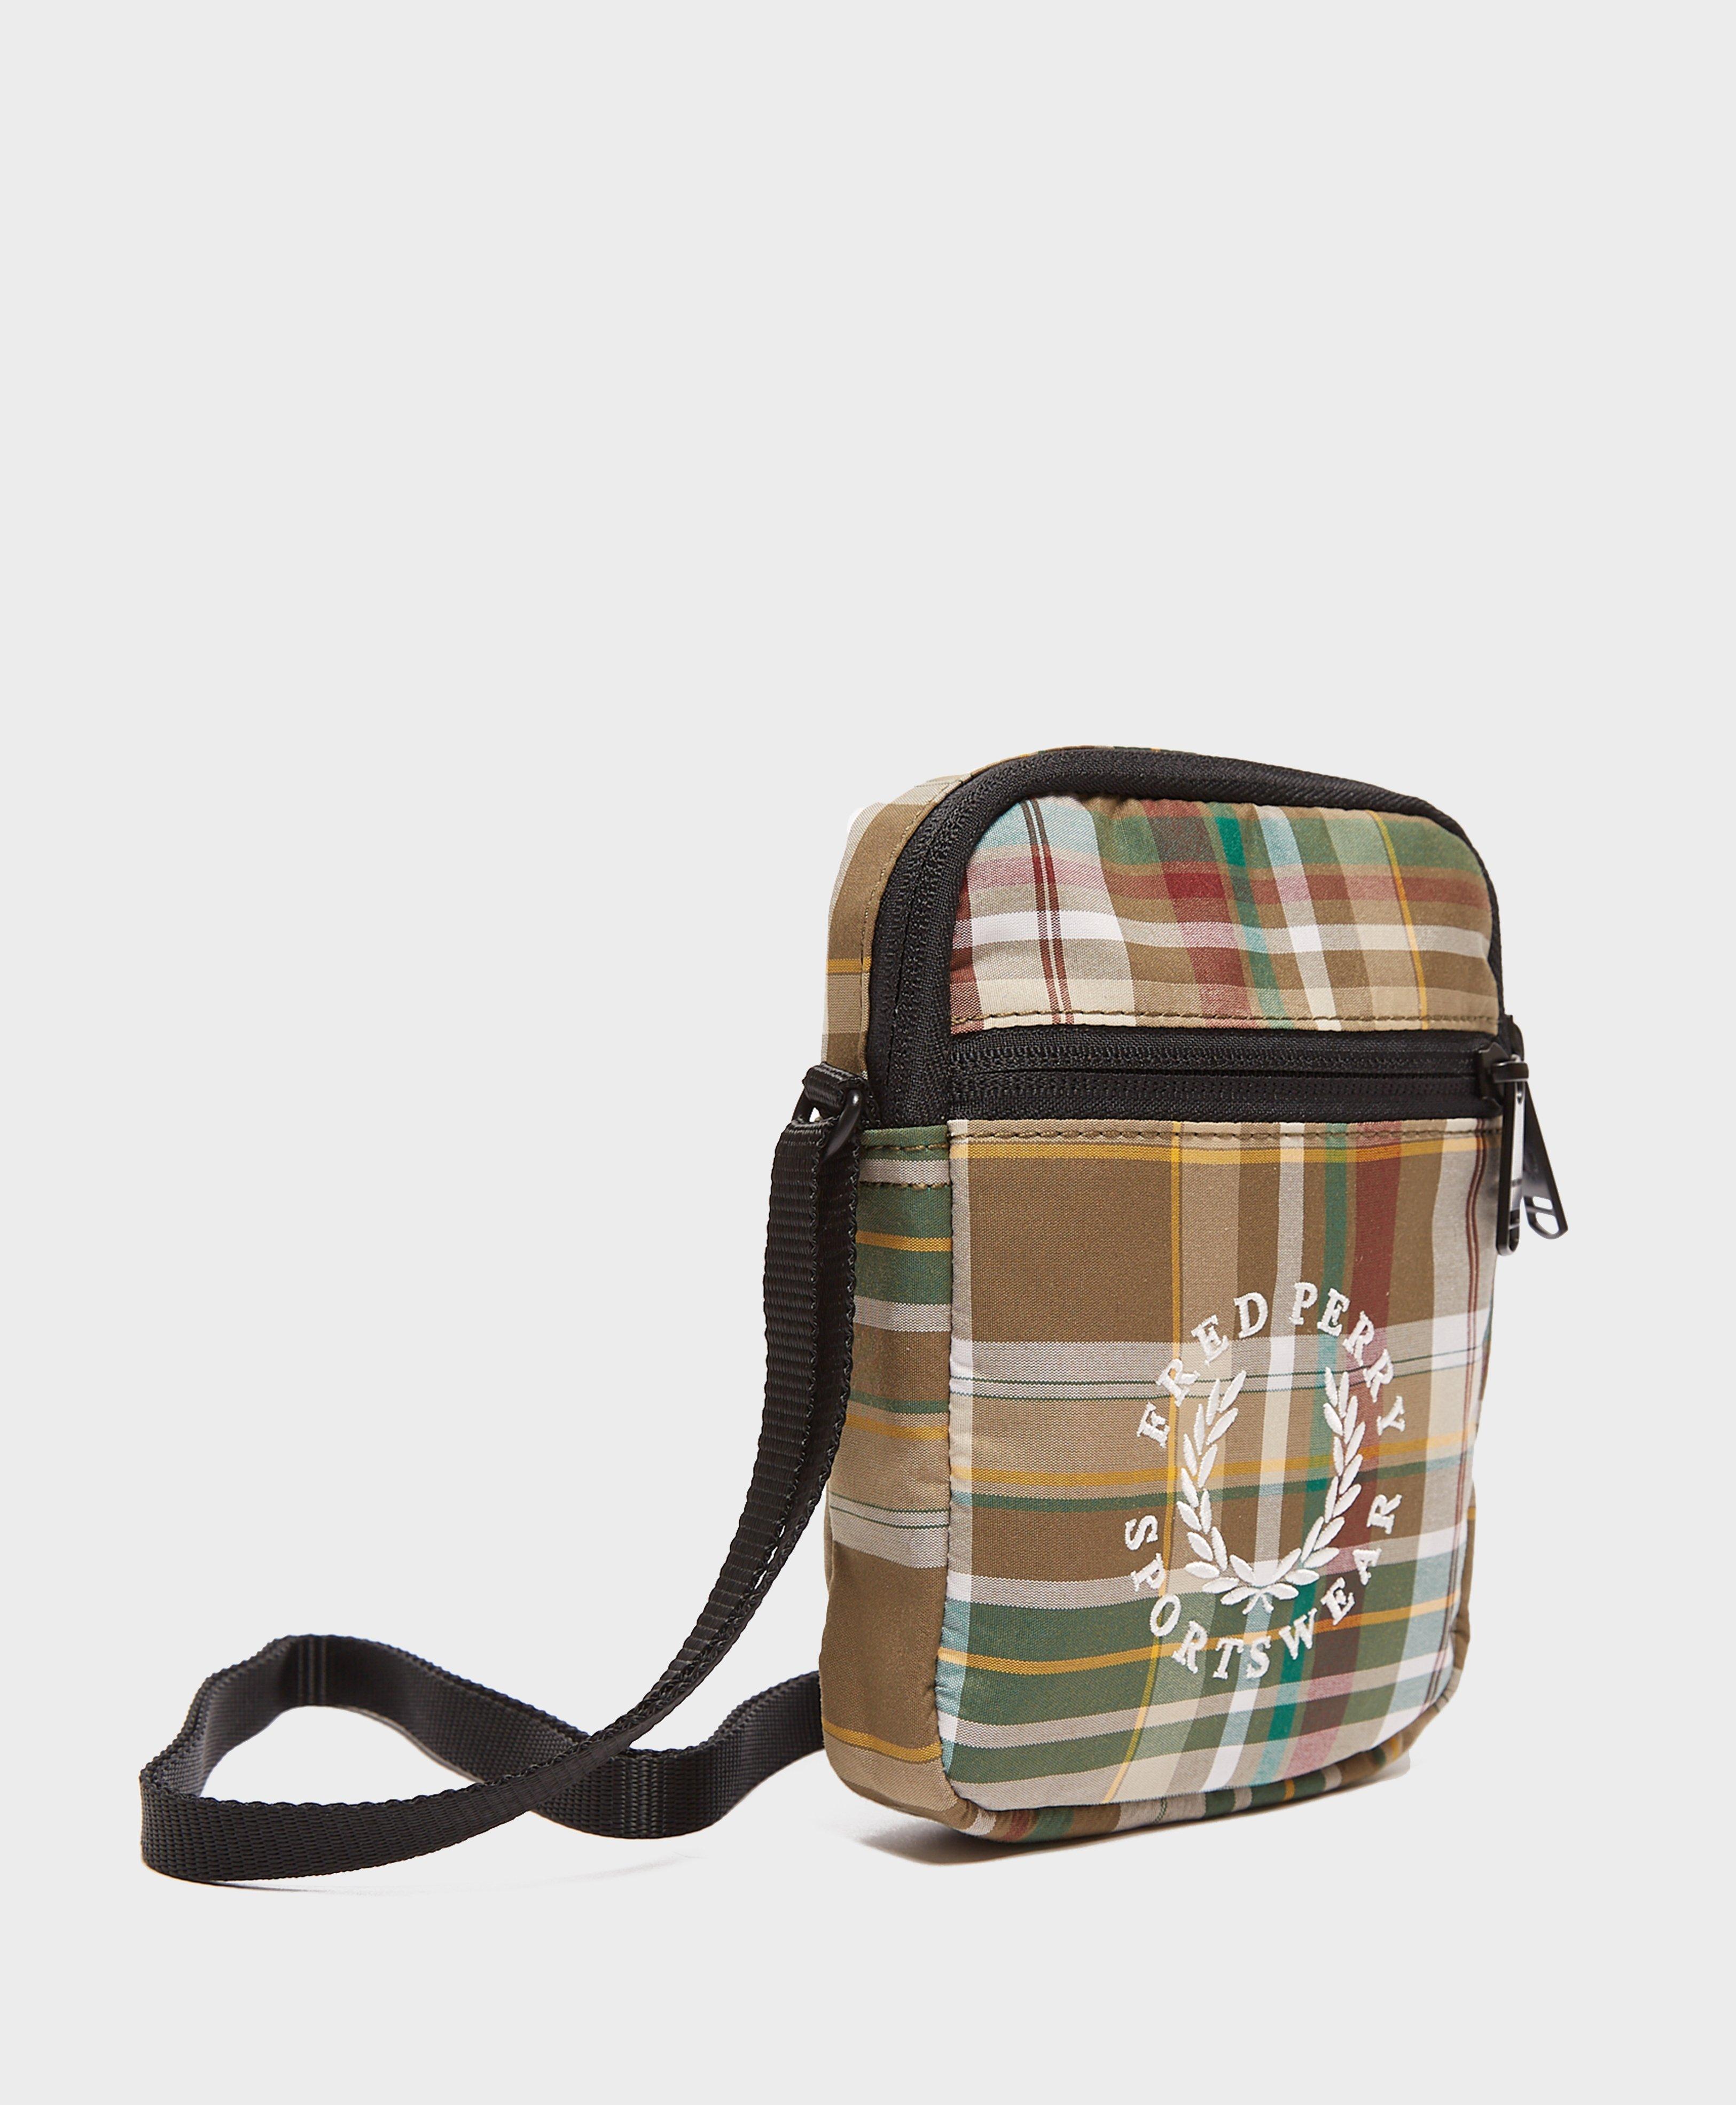 Fred Perry Check Cross Body Bag in Green for Men - Lyst